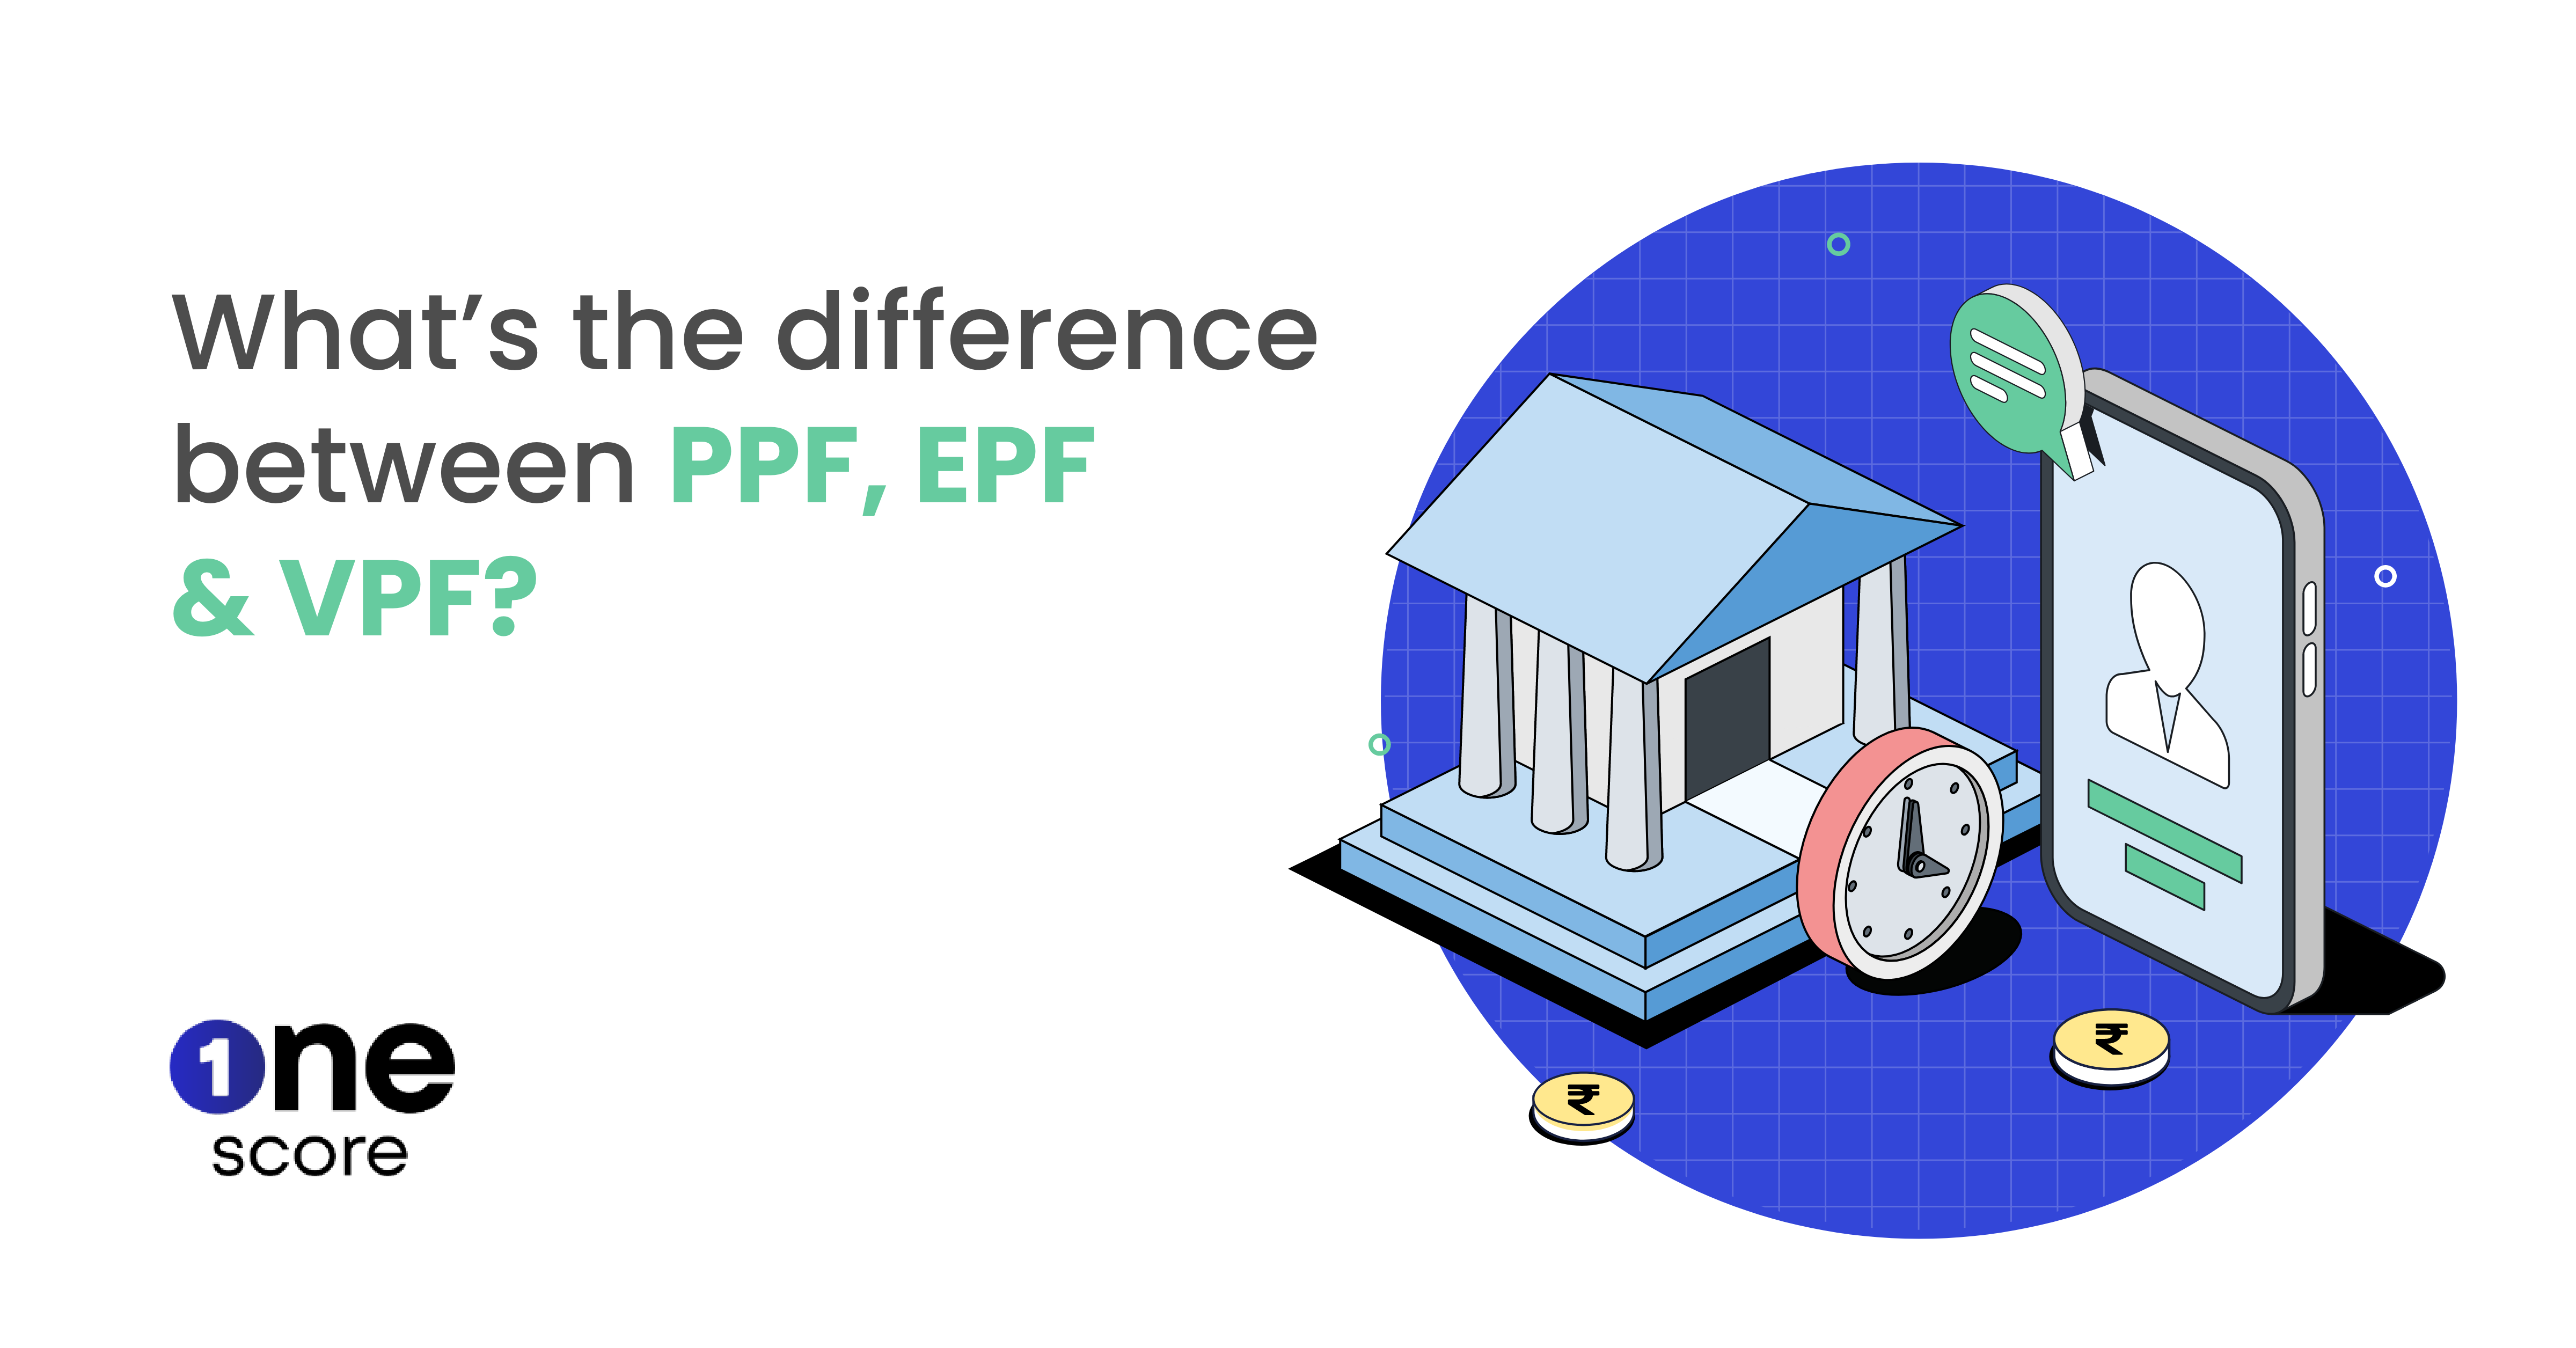 What’s the difference between PPF, EPF & VPF?